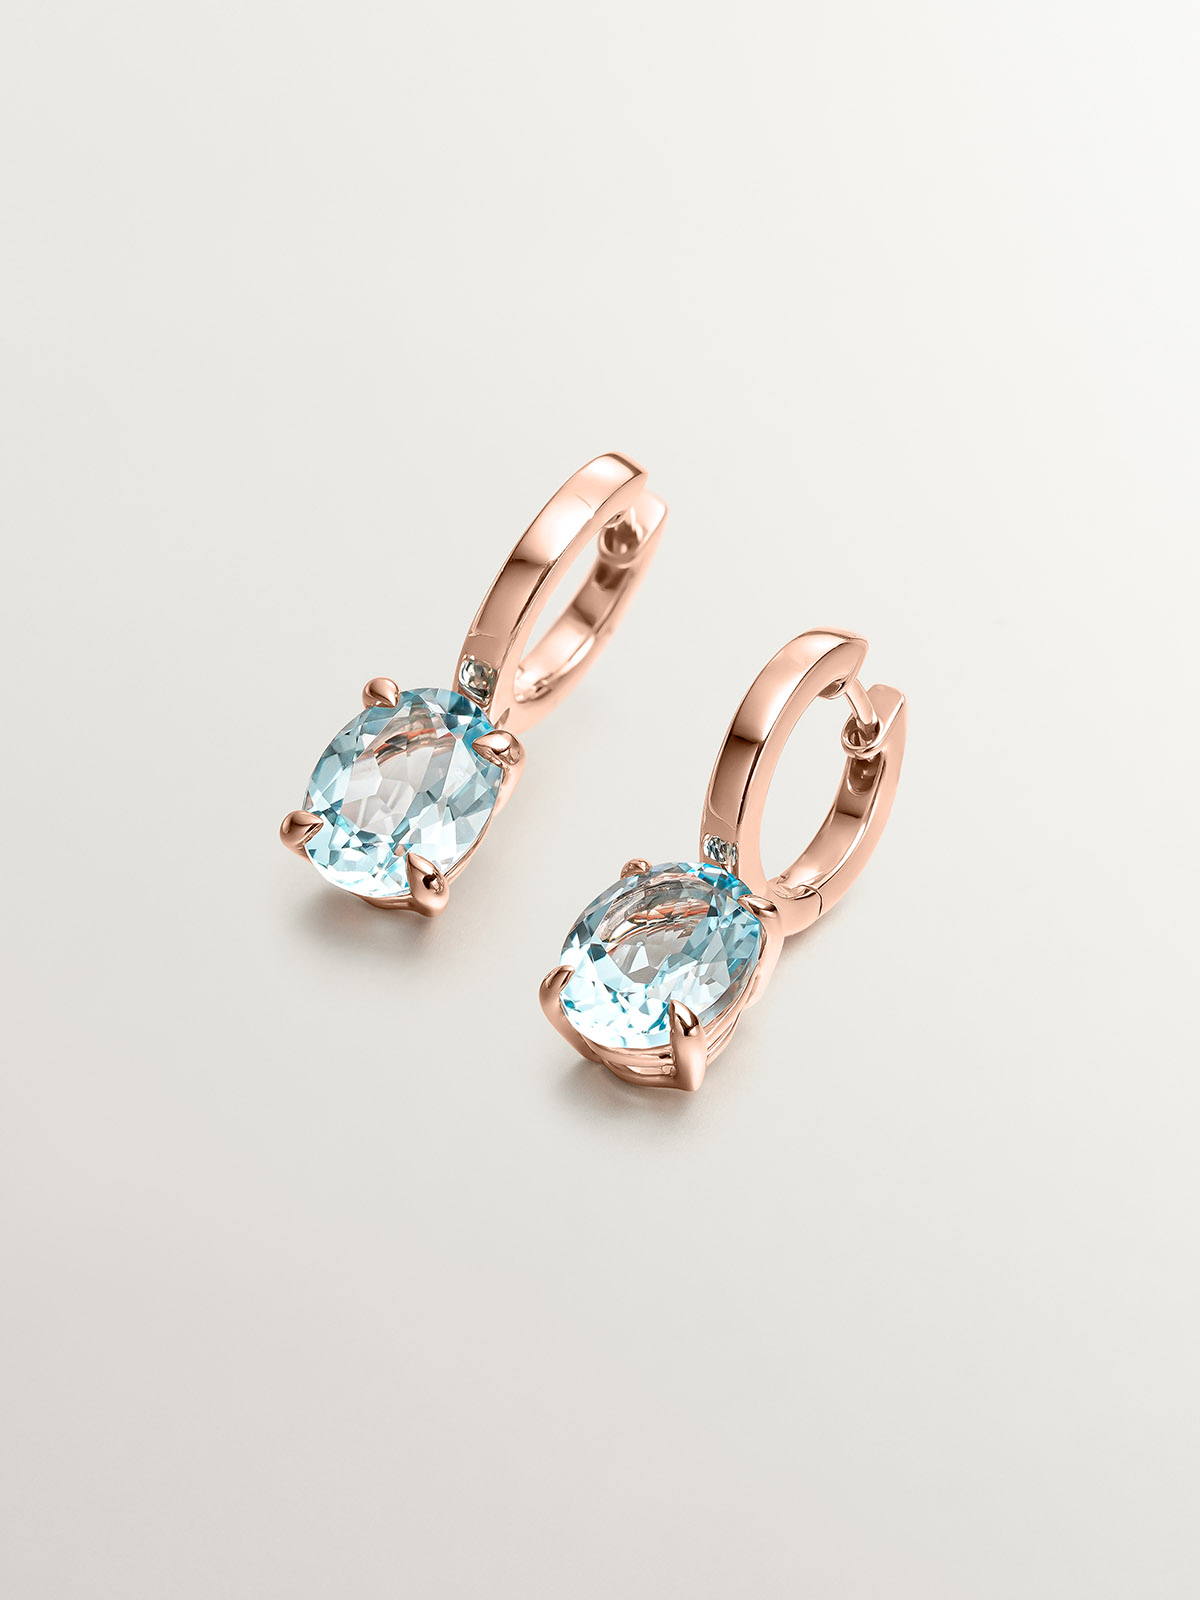 925 Silver earrings plated in 18K rose gold with sky blue topaz.